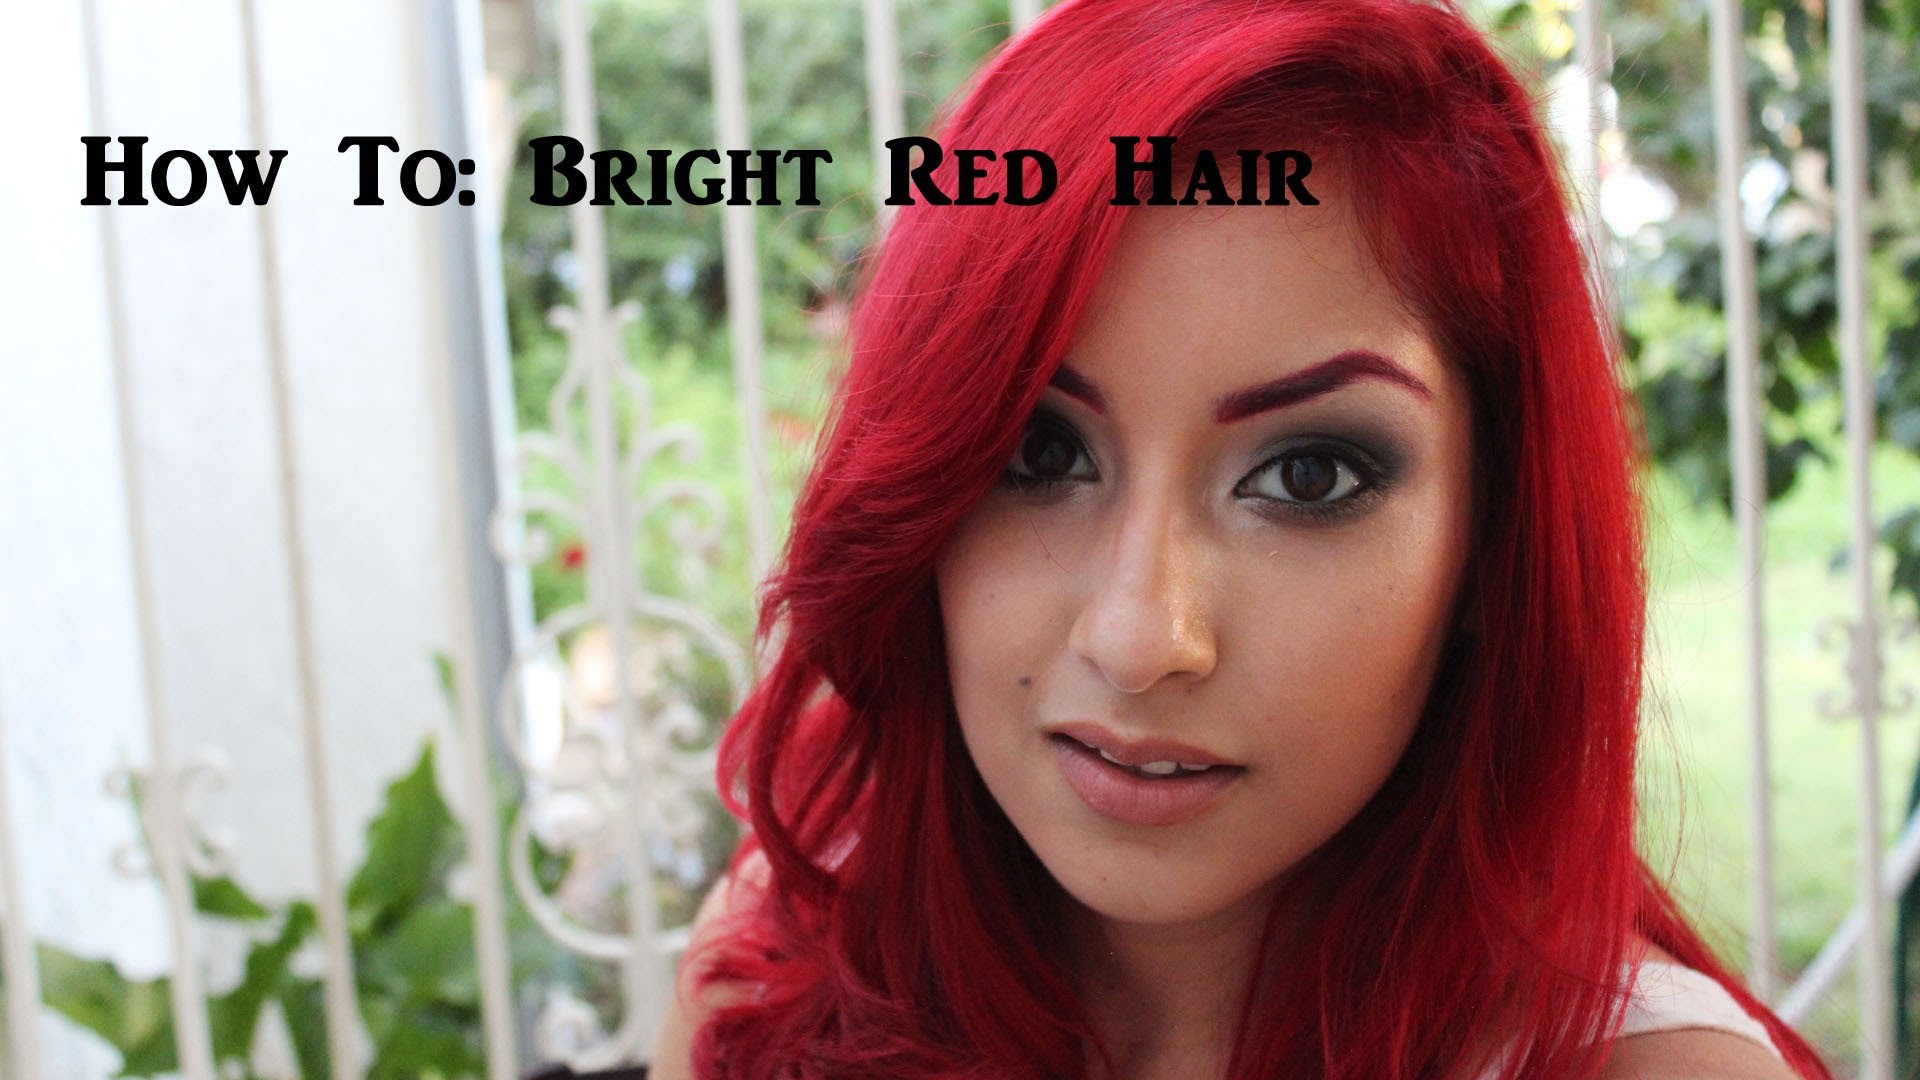 How to: Get Bright Red Hair